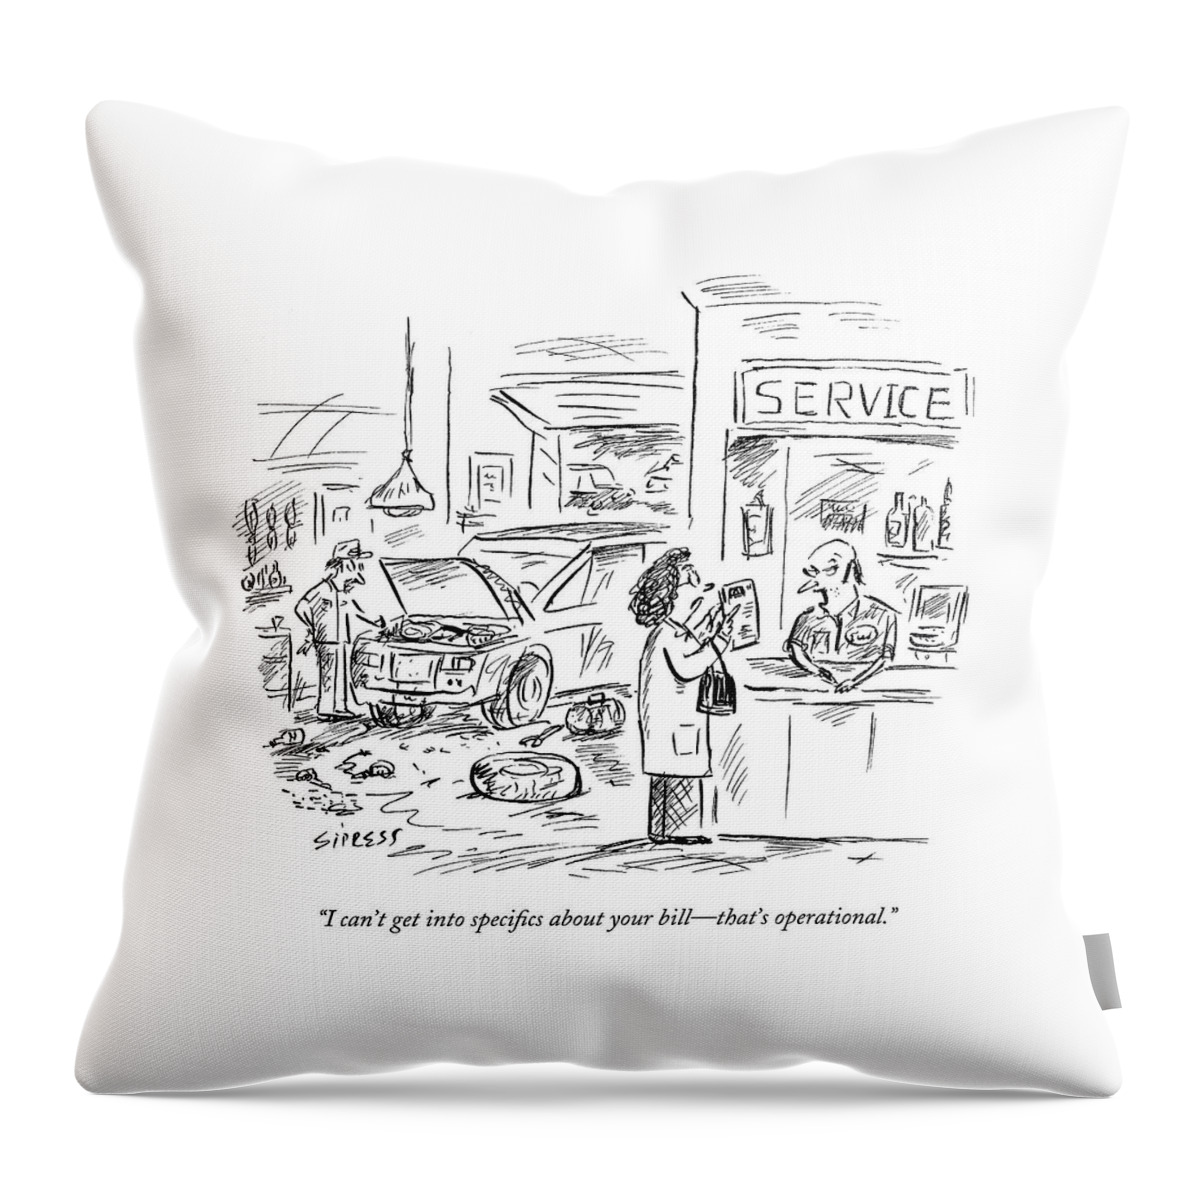 I Can't Get Into Specifics About Your Bill - Throw Pillow